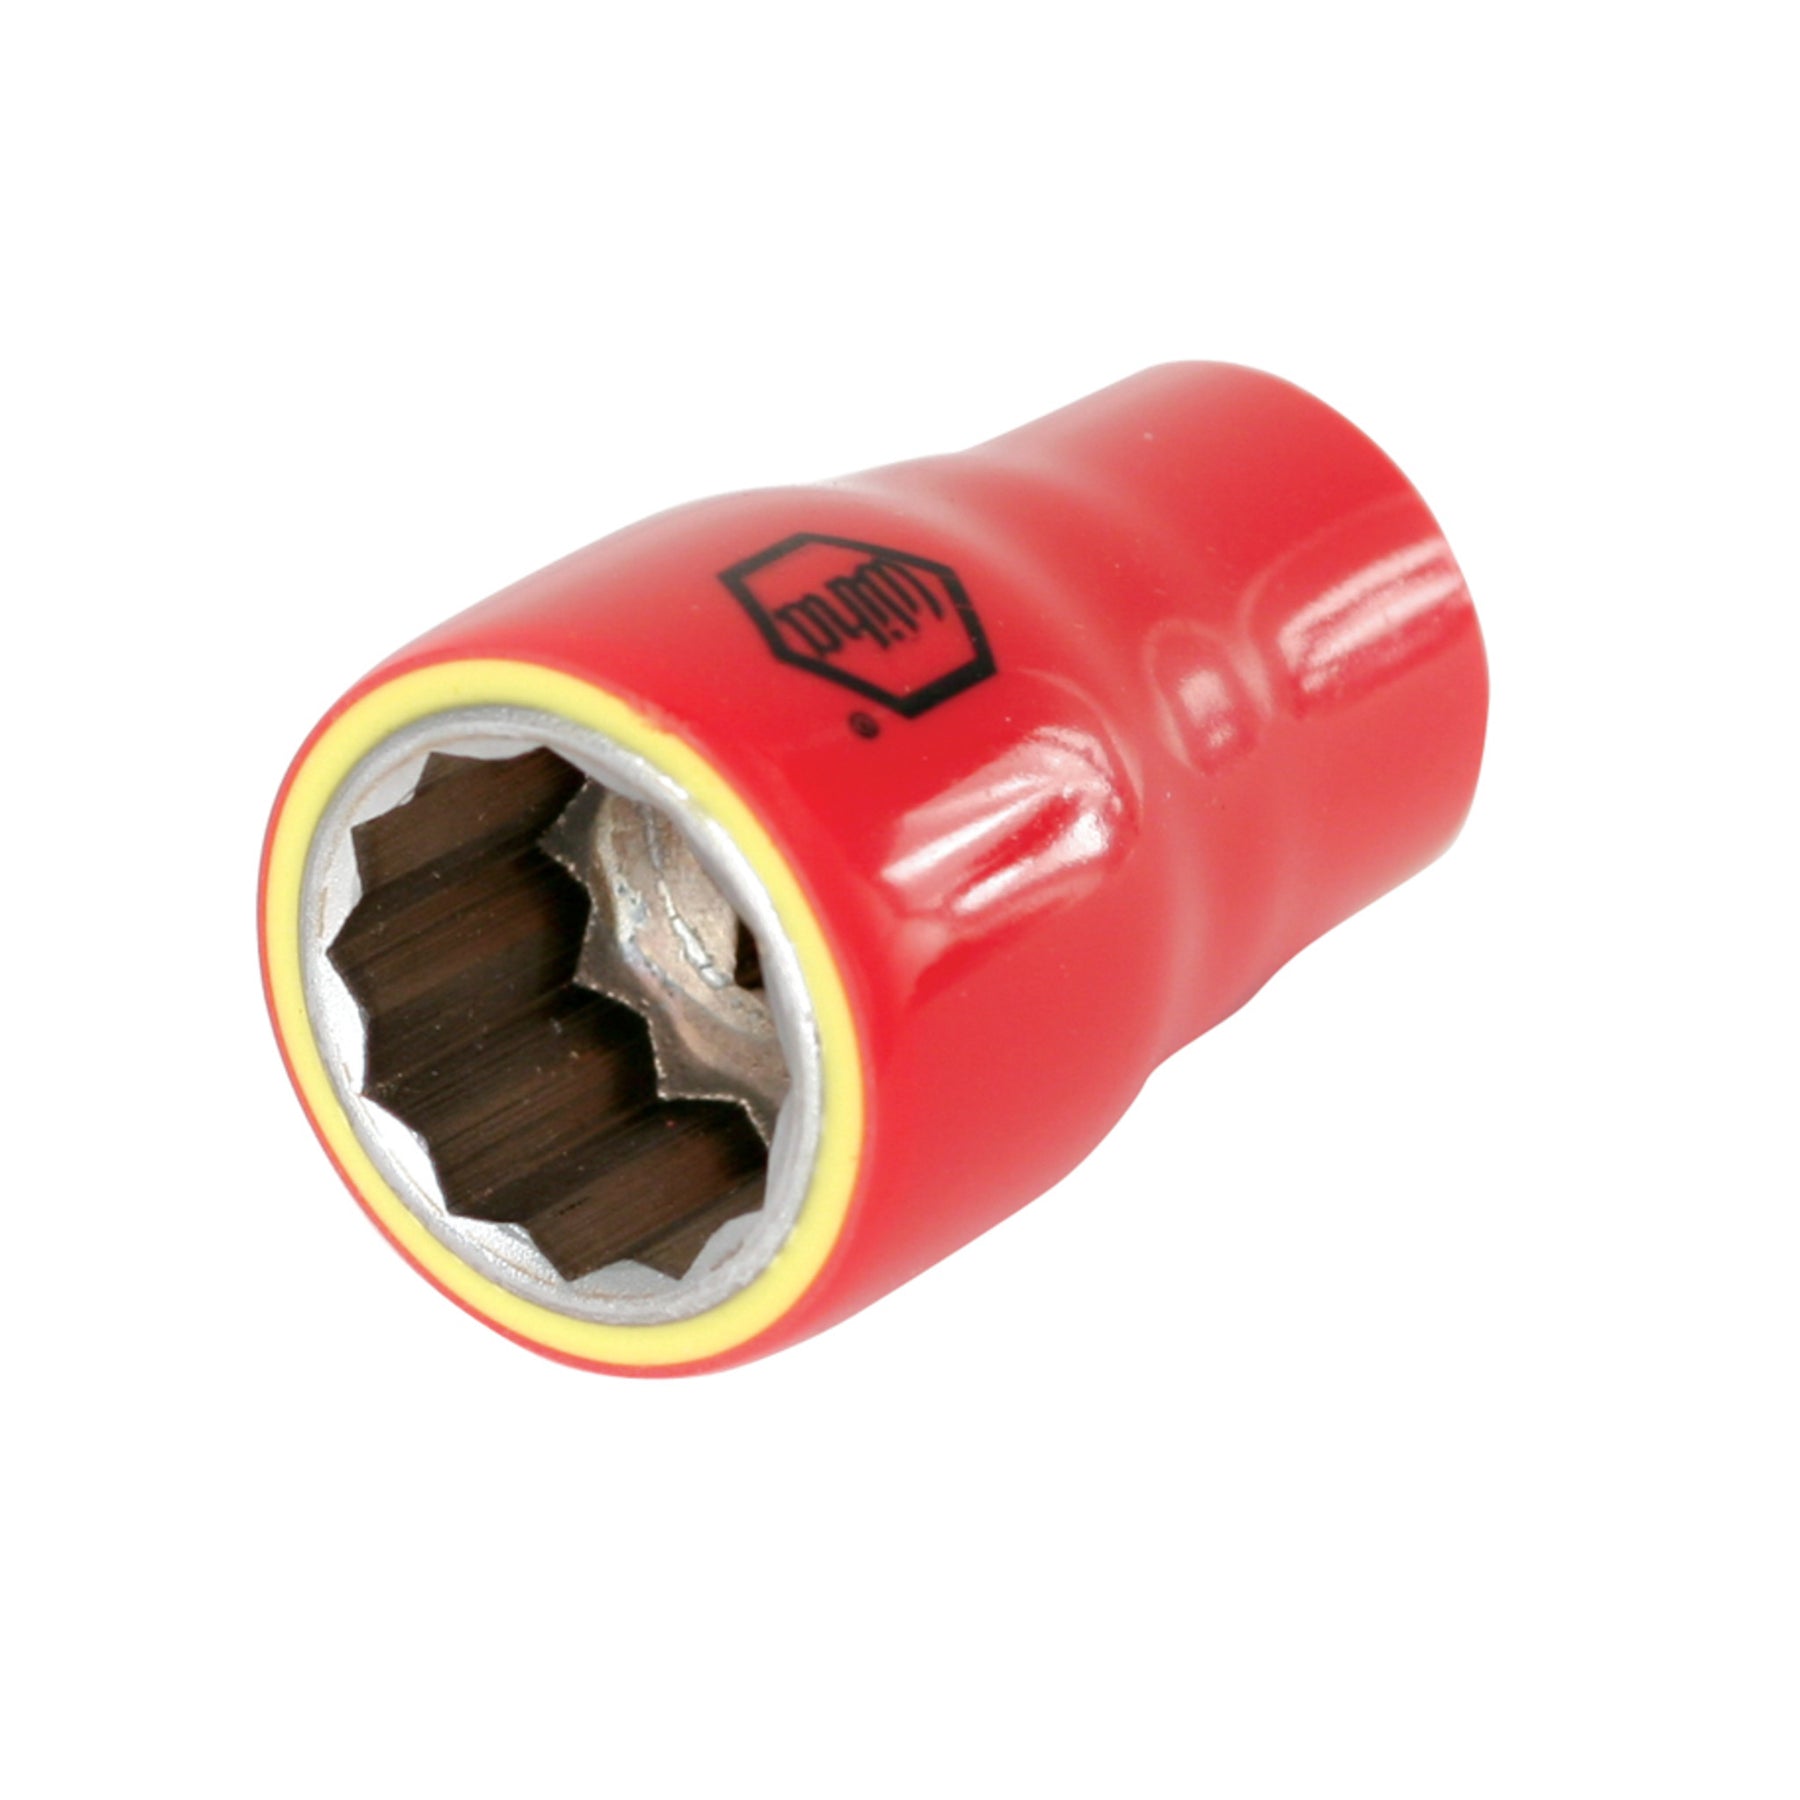 Insulated Socket 1/2" Drive 26mm